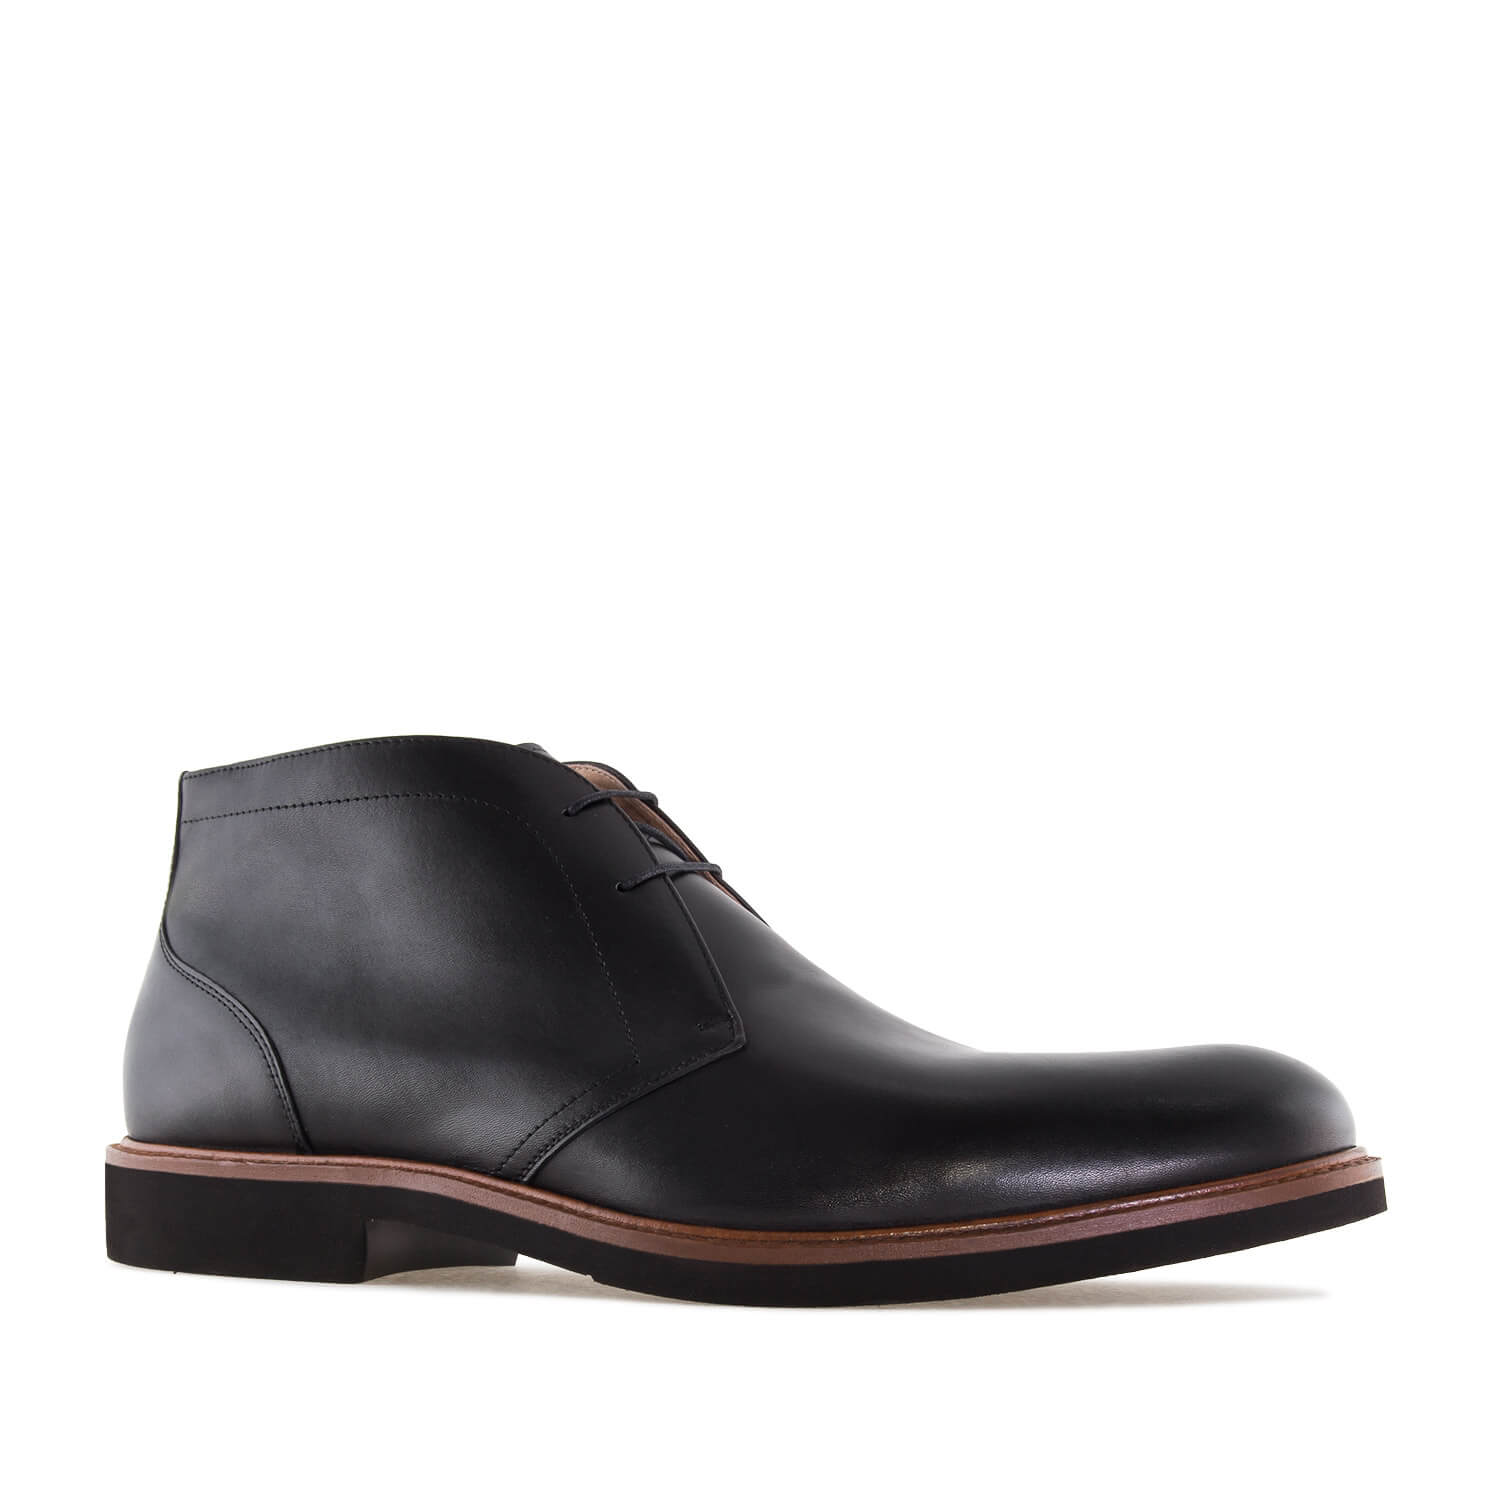 Men's Ankle Boots in Black Leather 